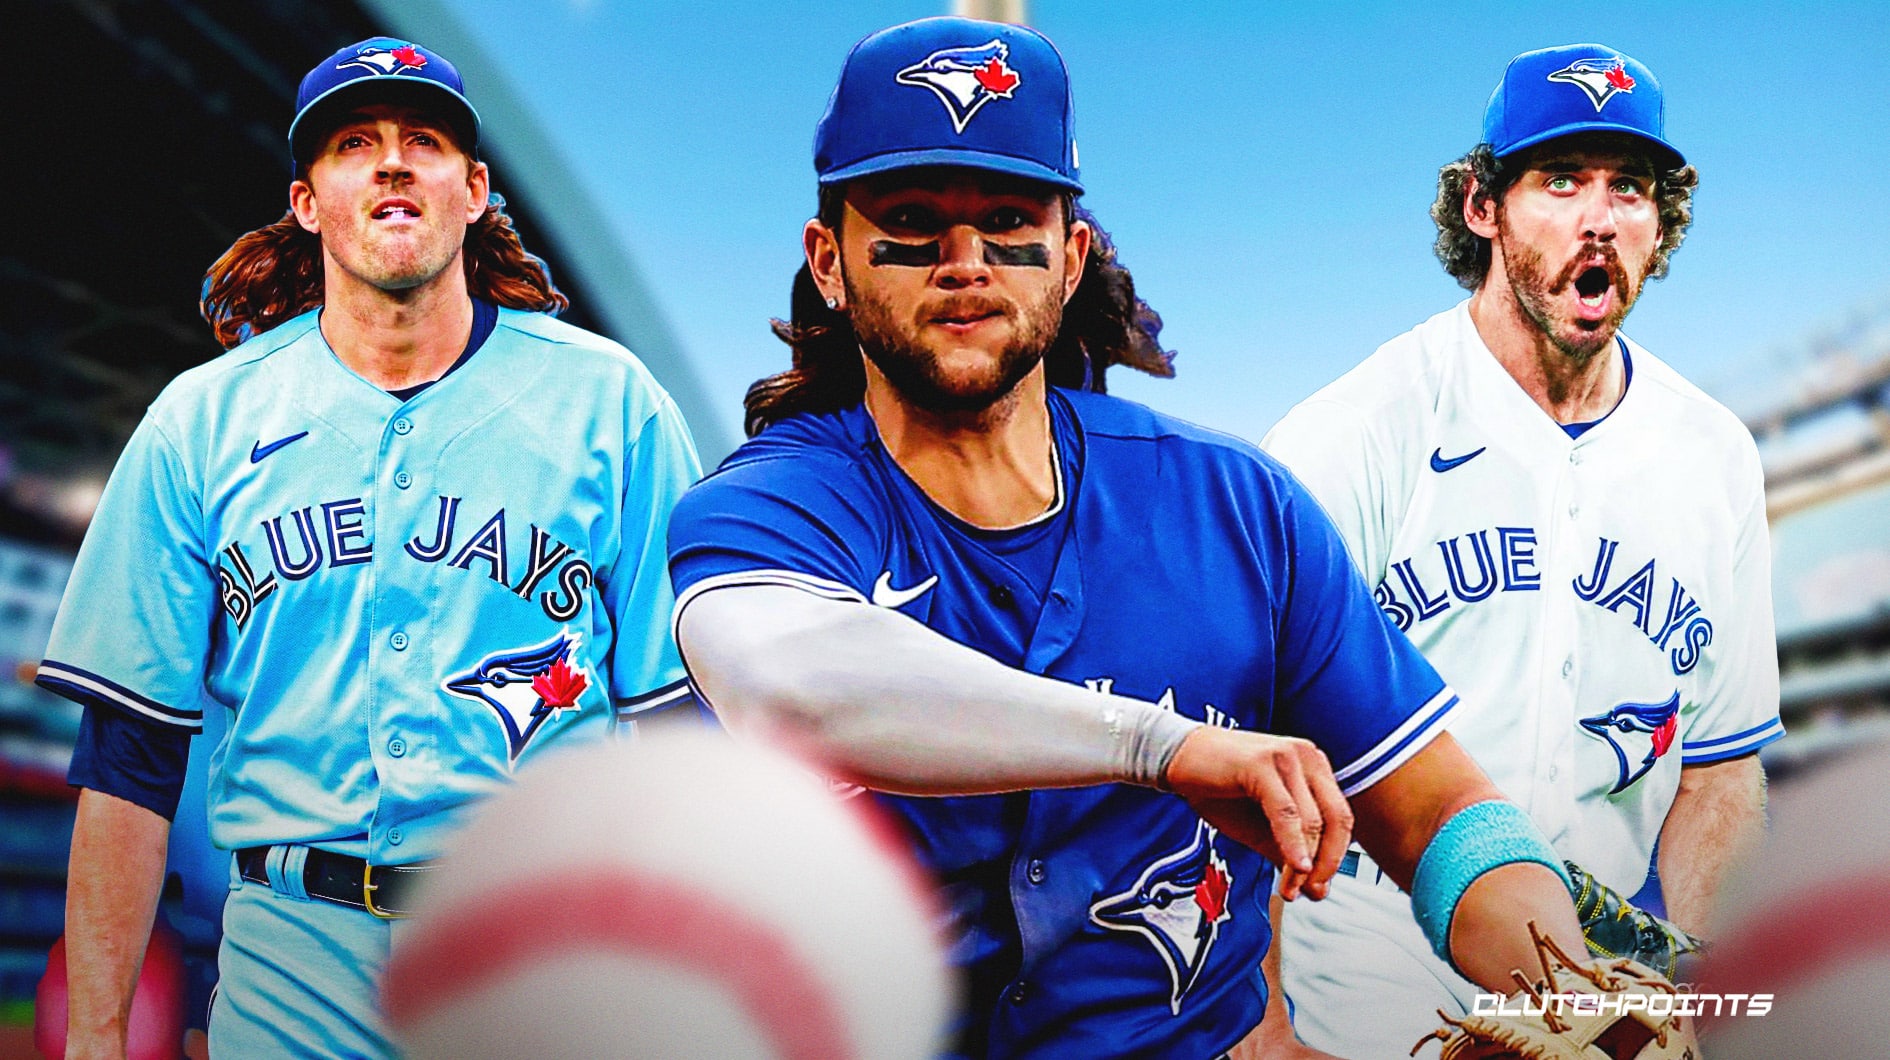 Blue Jays lead the way with 3 starters in MLB All-Star Game